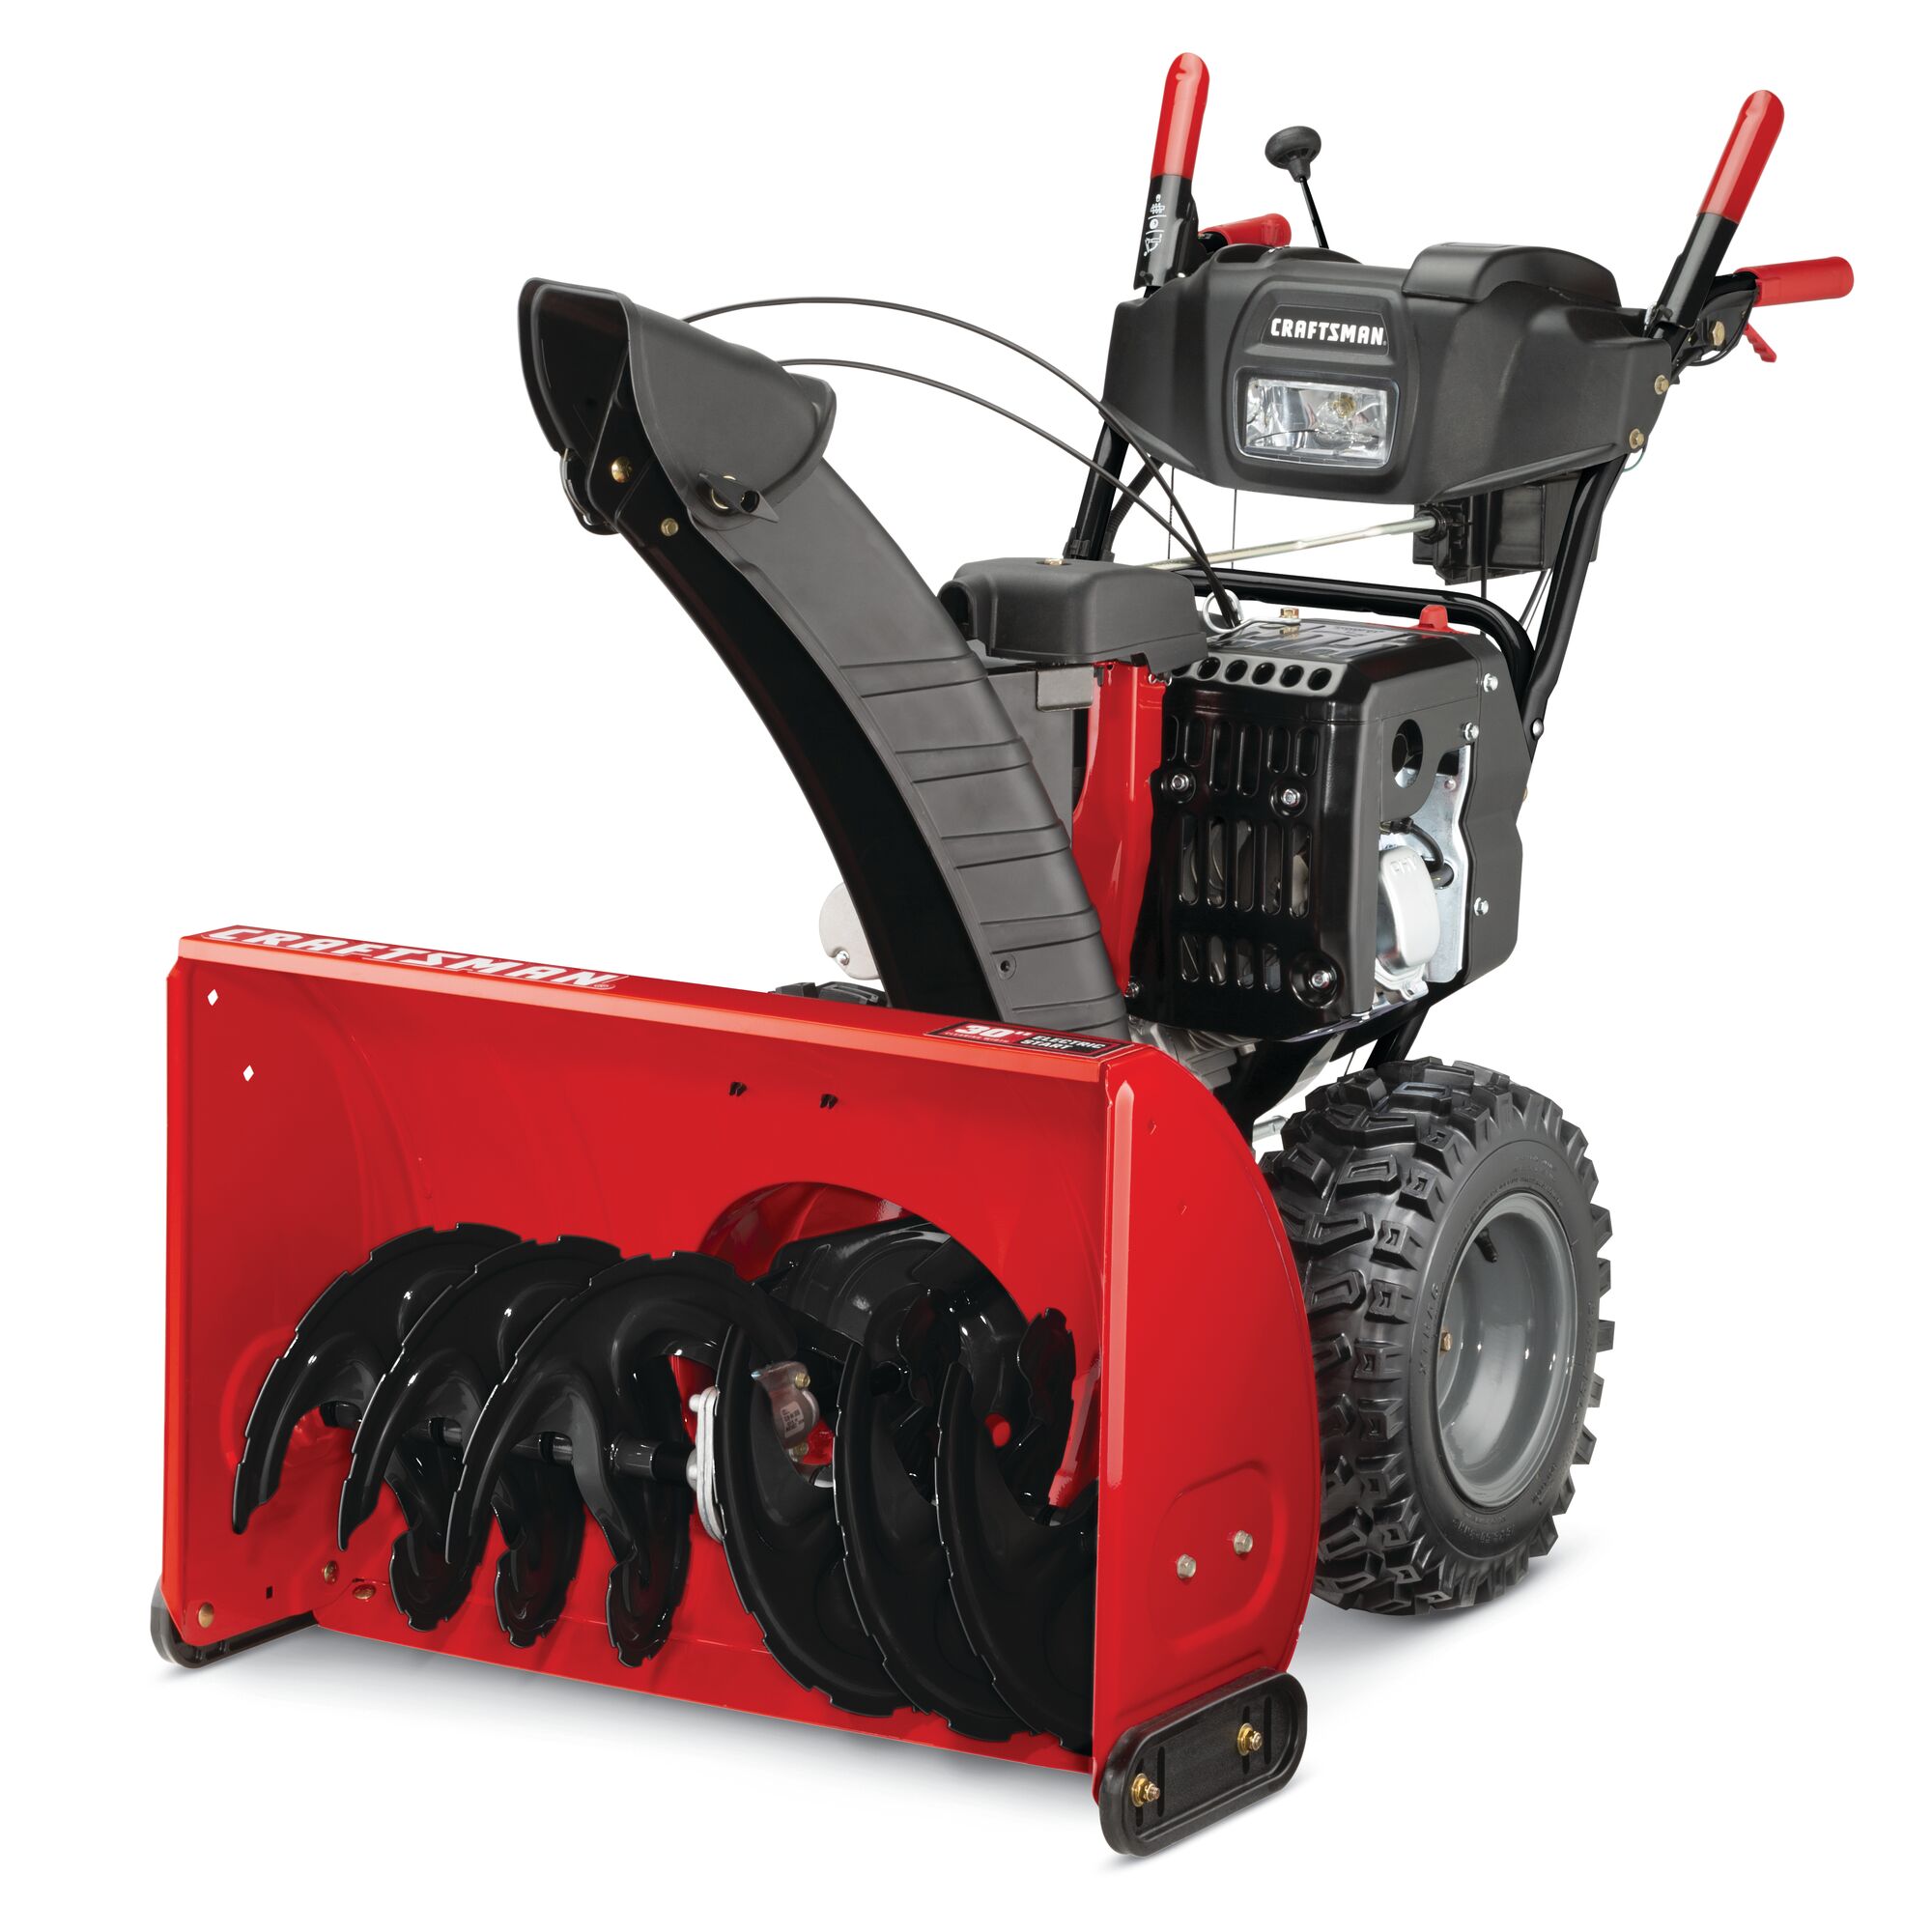 Profile of 30 inch 357 CC electric start two stage snow blower.